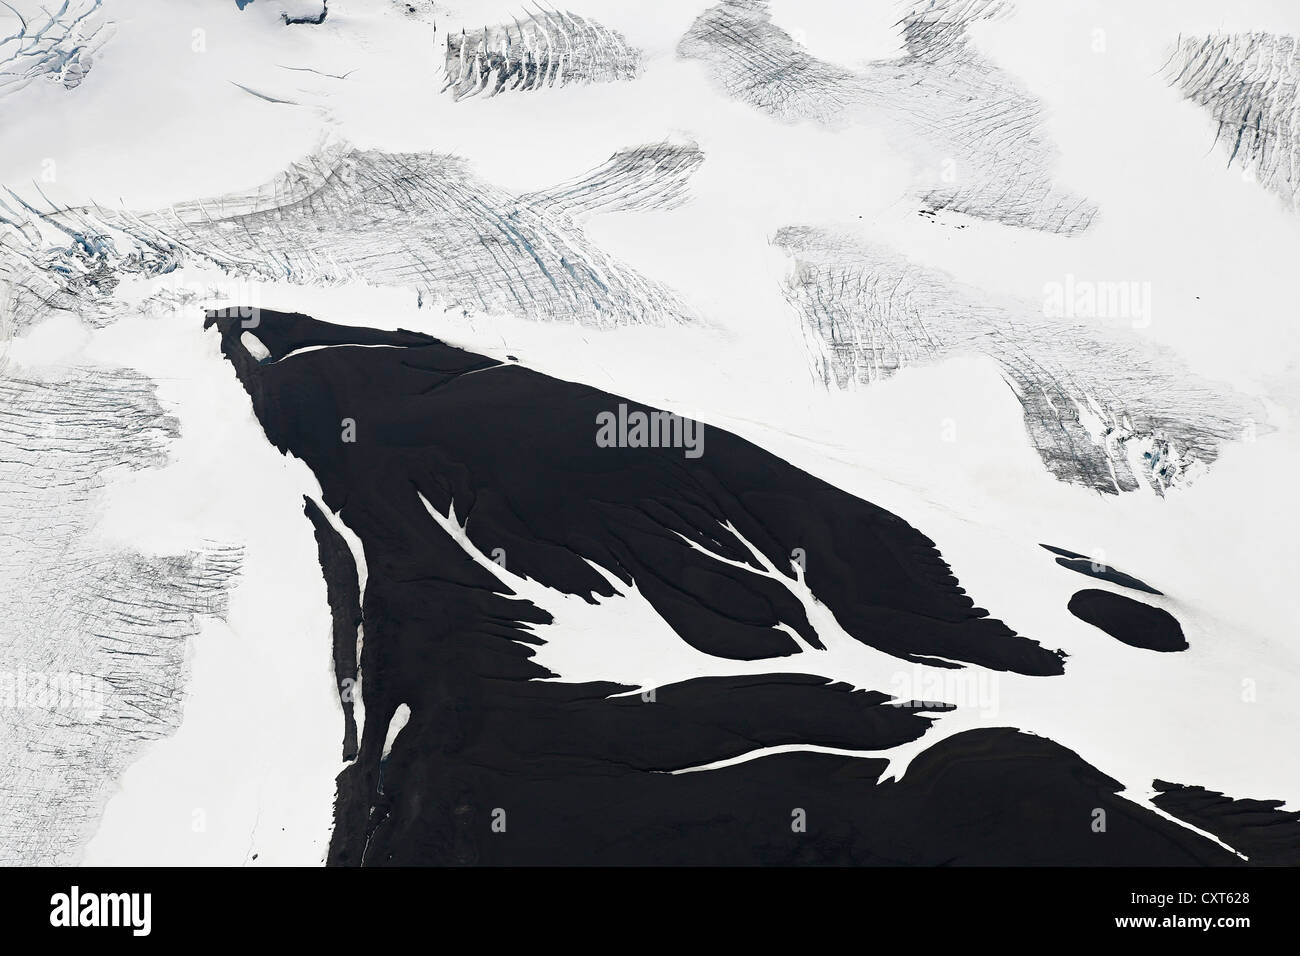 Aerial view, ice crevices and structures of volcanic ash and black lava in the ice and snow of the Vatnajoekull glacier, Iceland Stock Photo